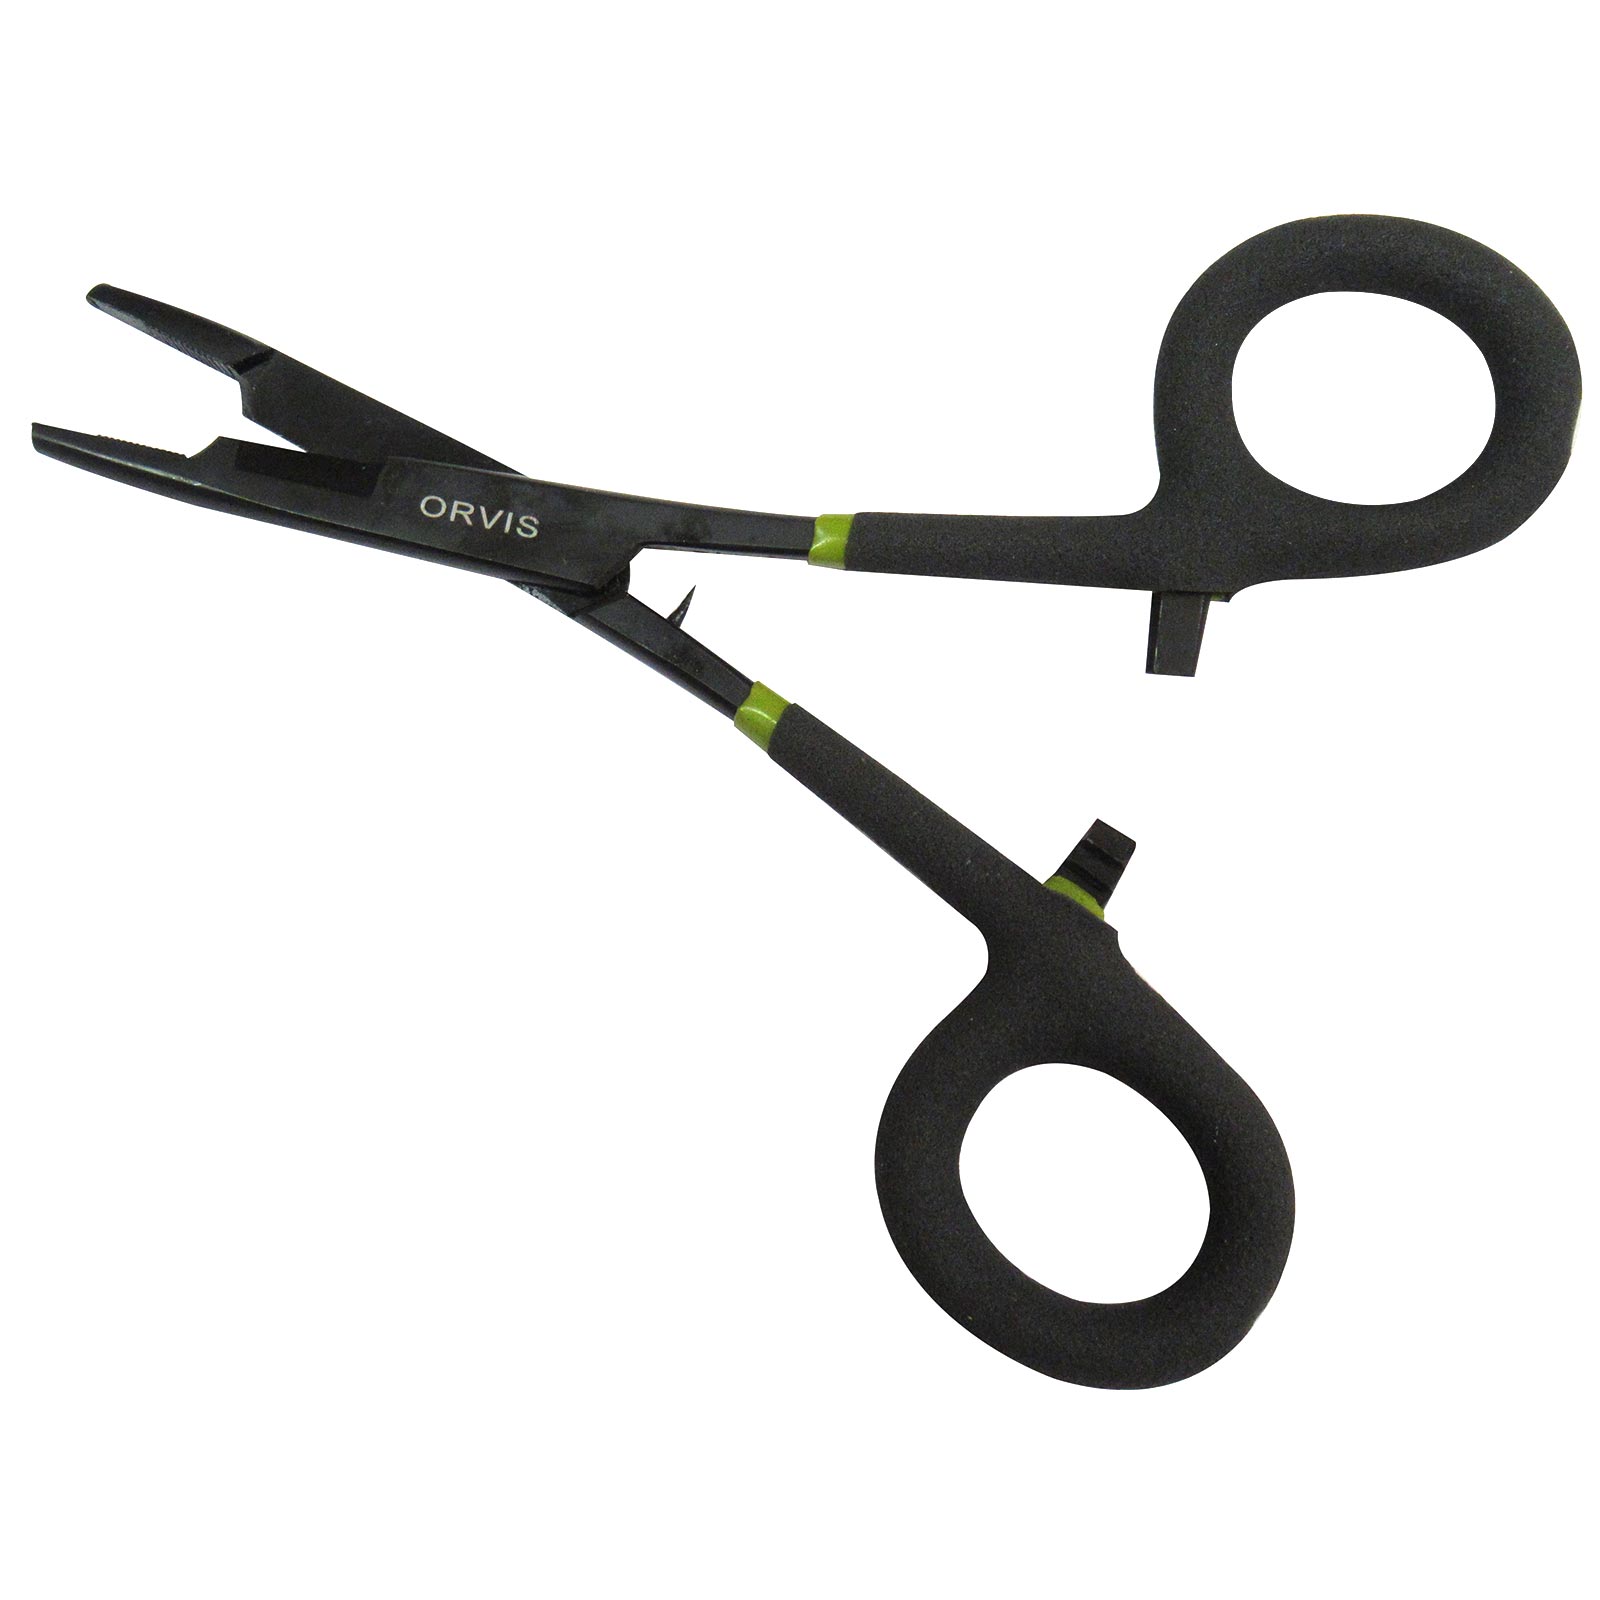 Shop Fly Tying Scissors: Loon, Tiemco, and More